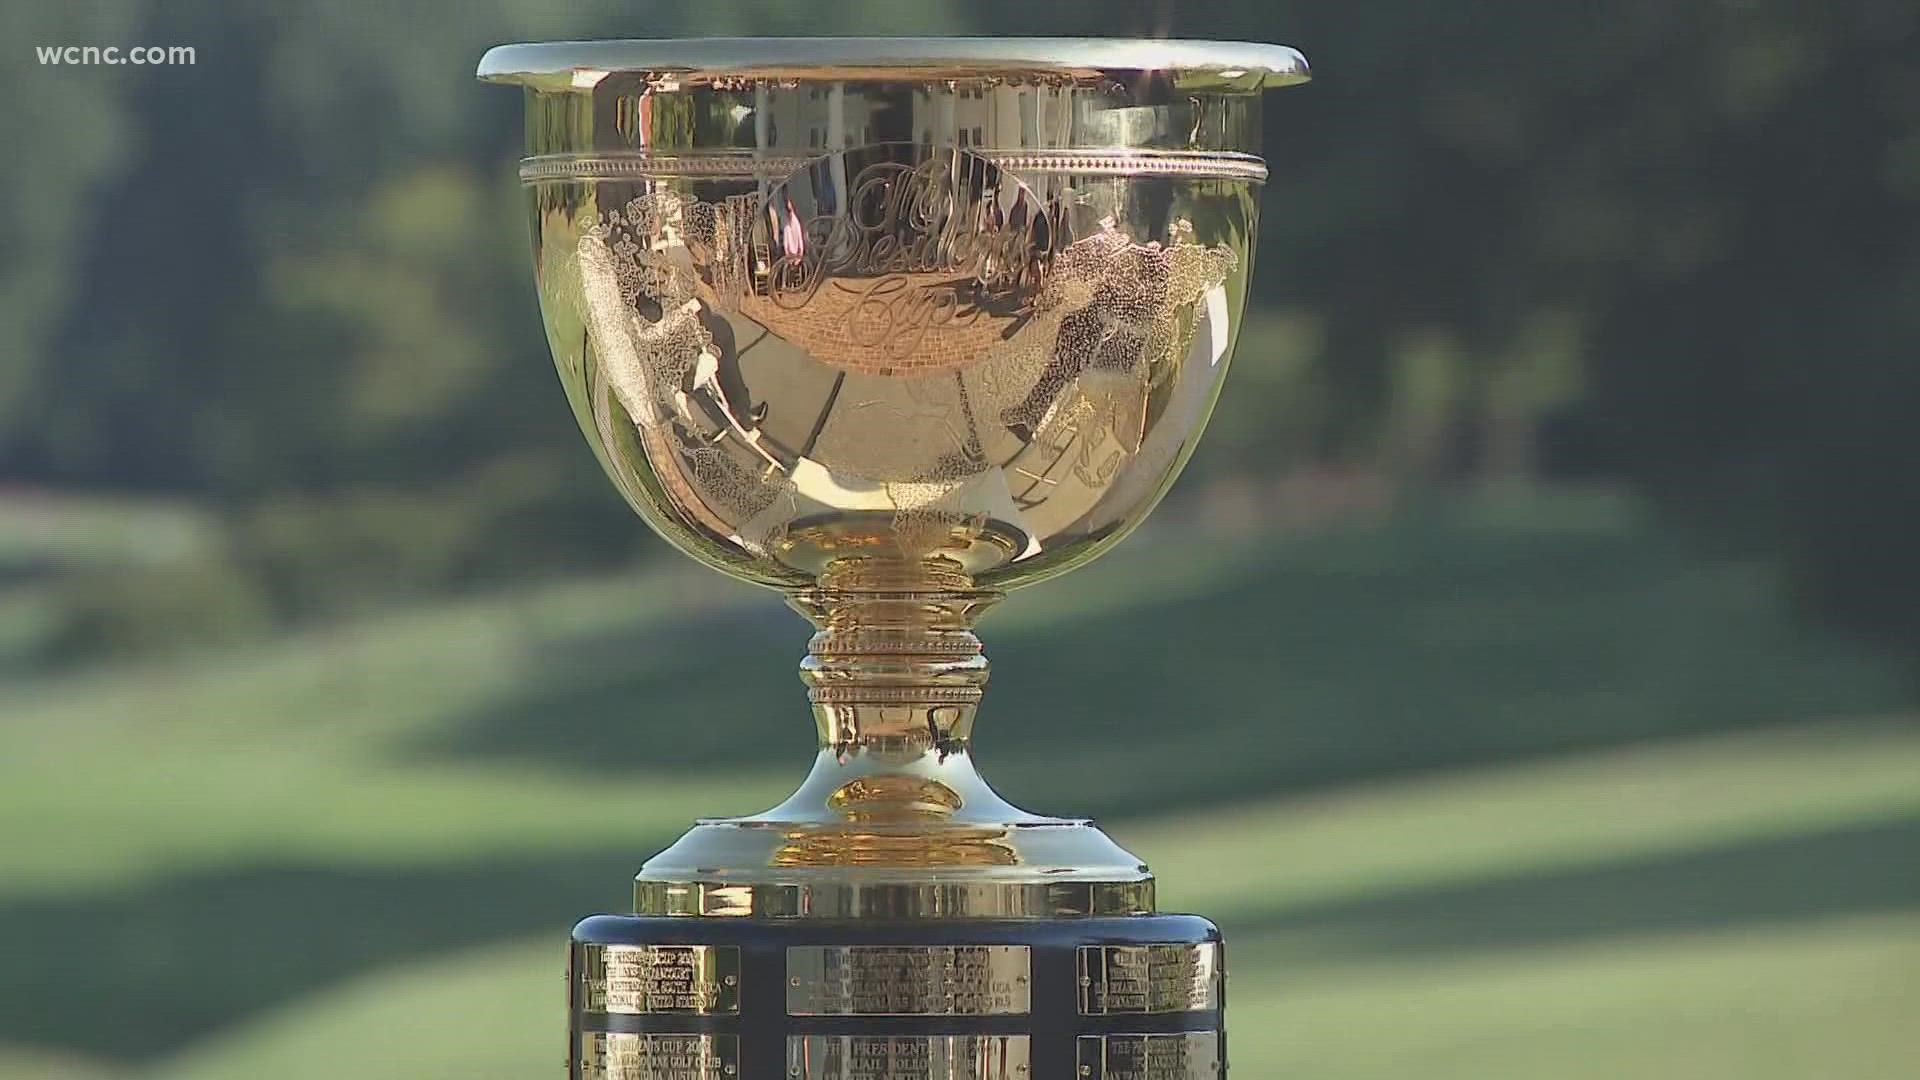 In one year, the Presidents Cup will come to Quail Hollow.